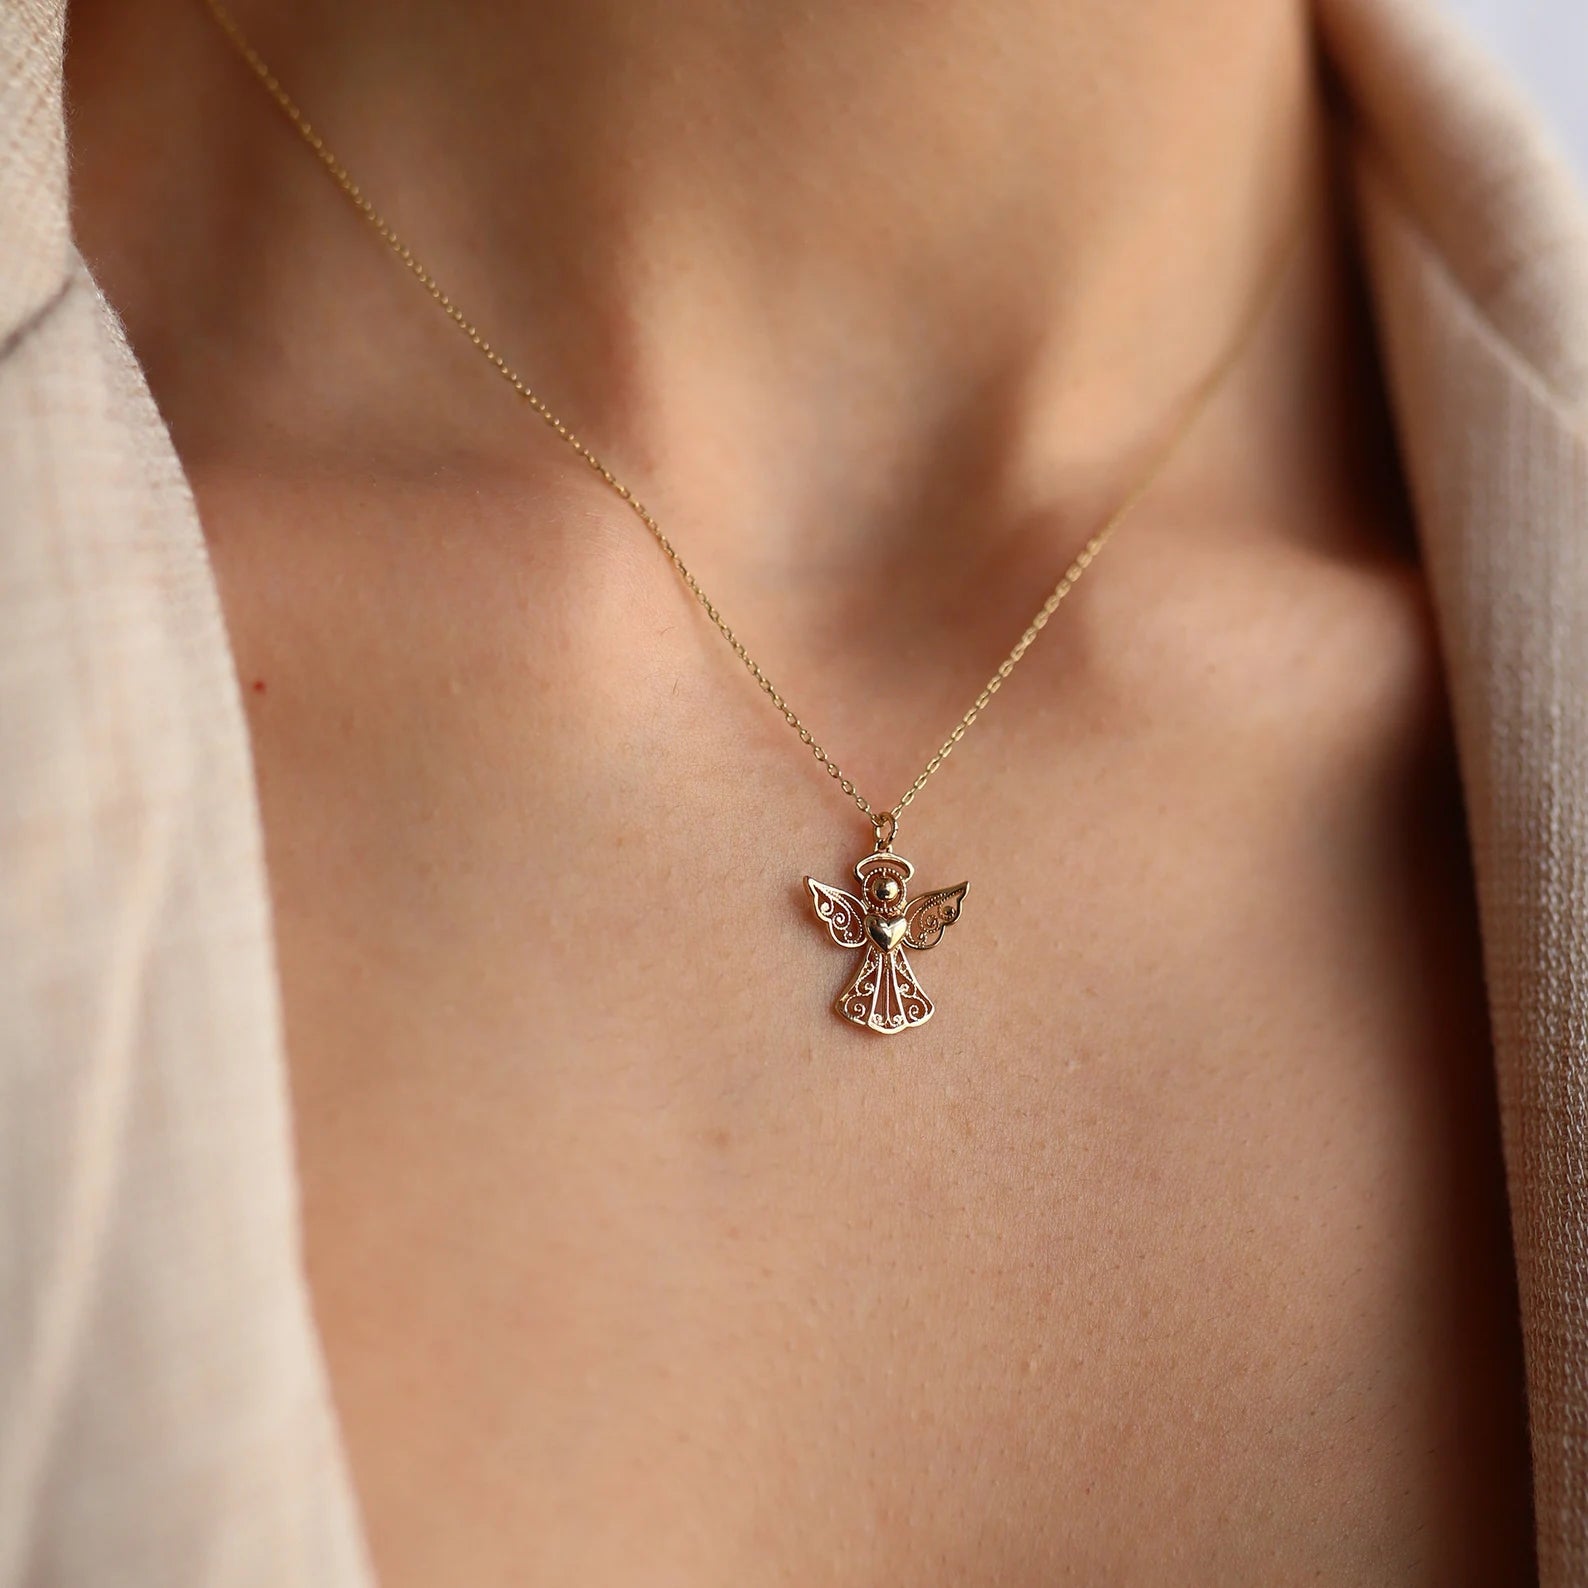 Detailed Guardian Angel Necklace